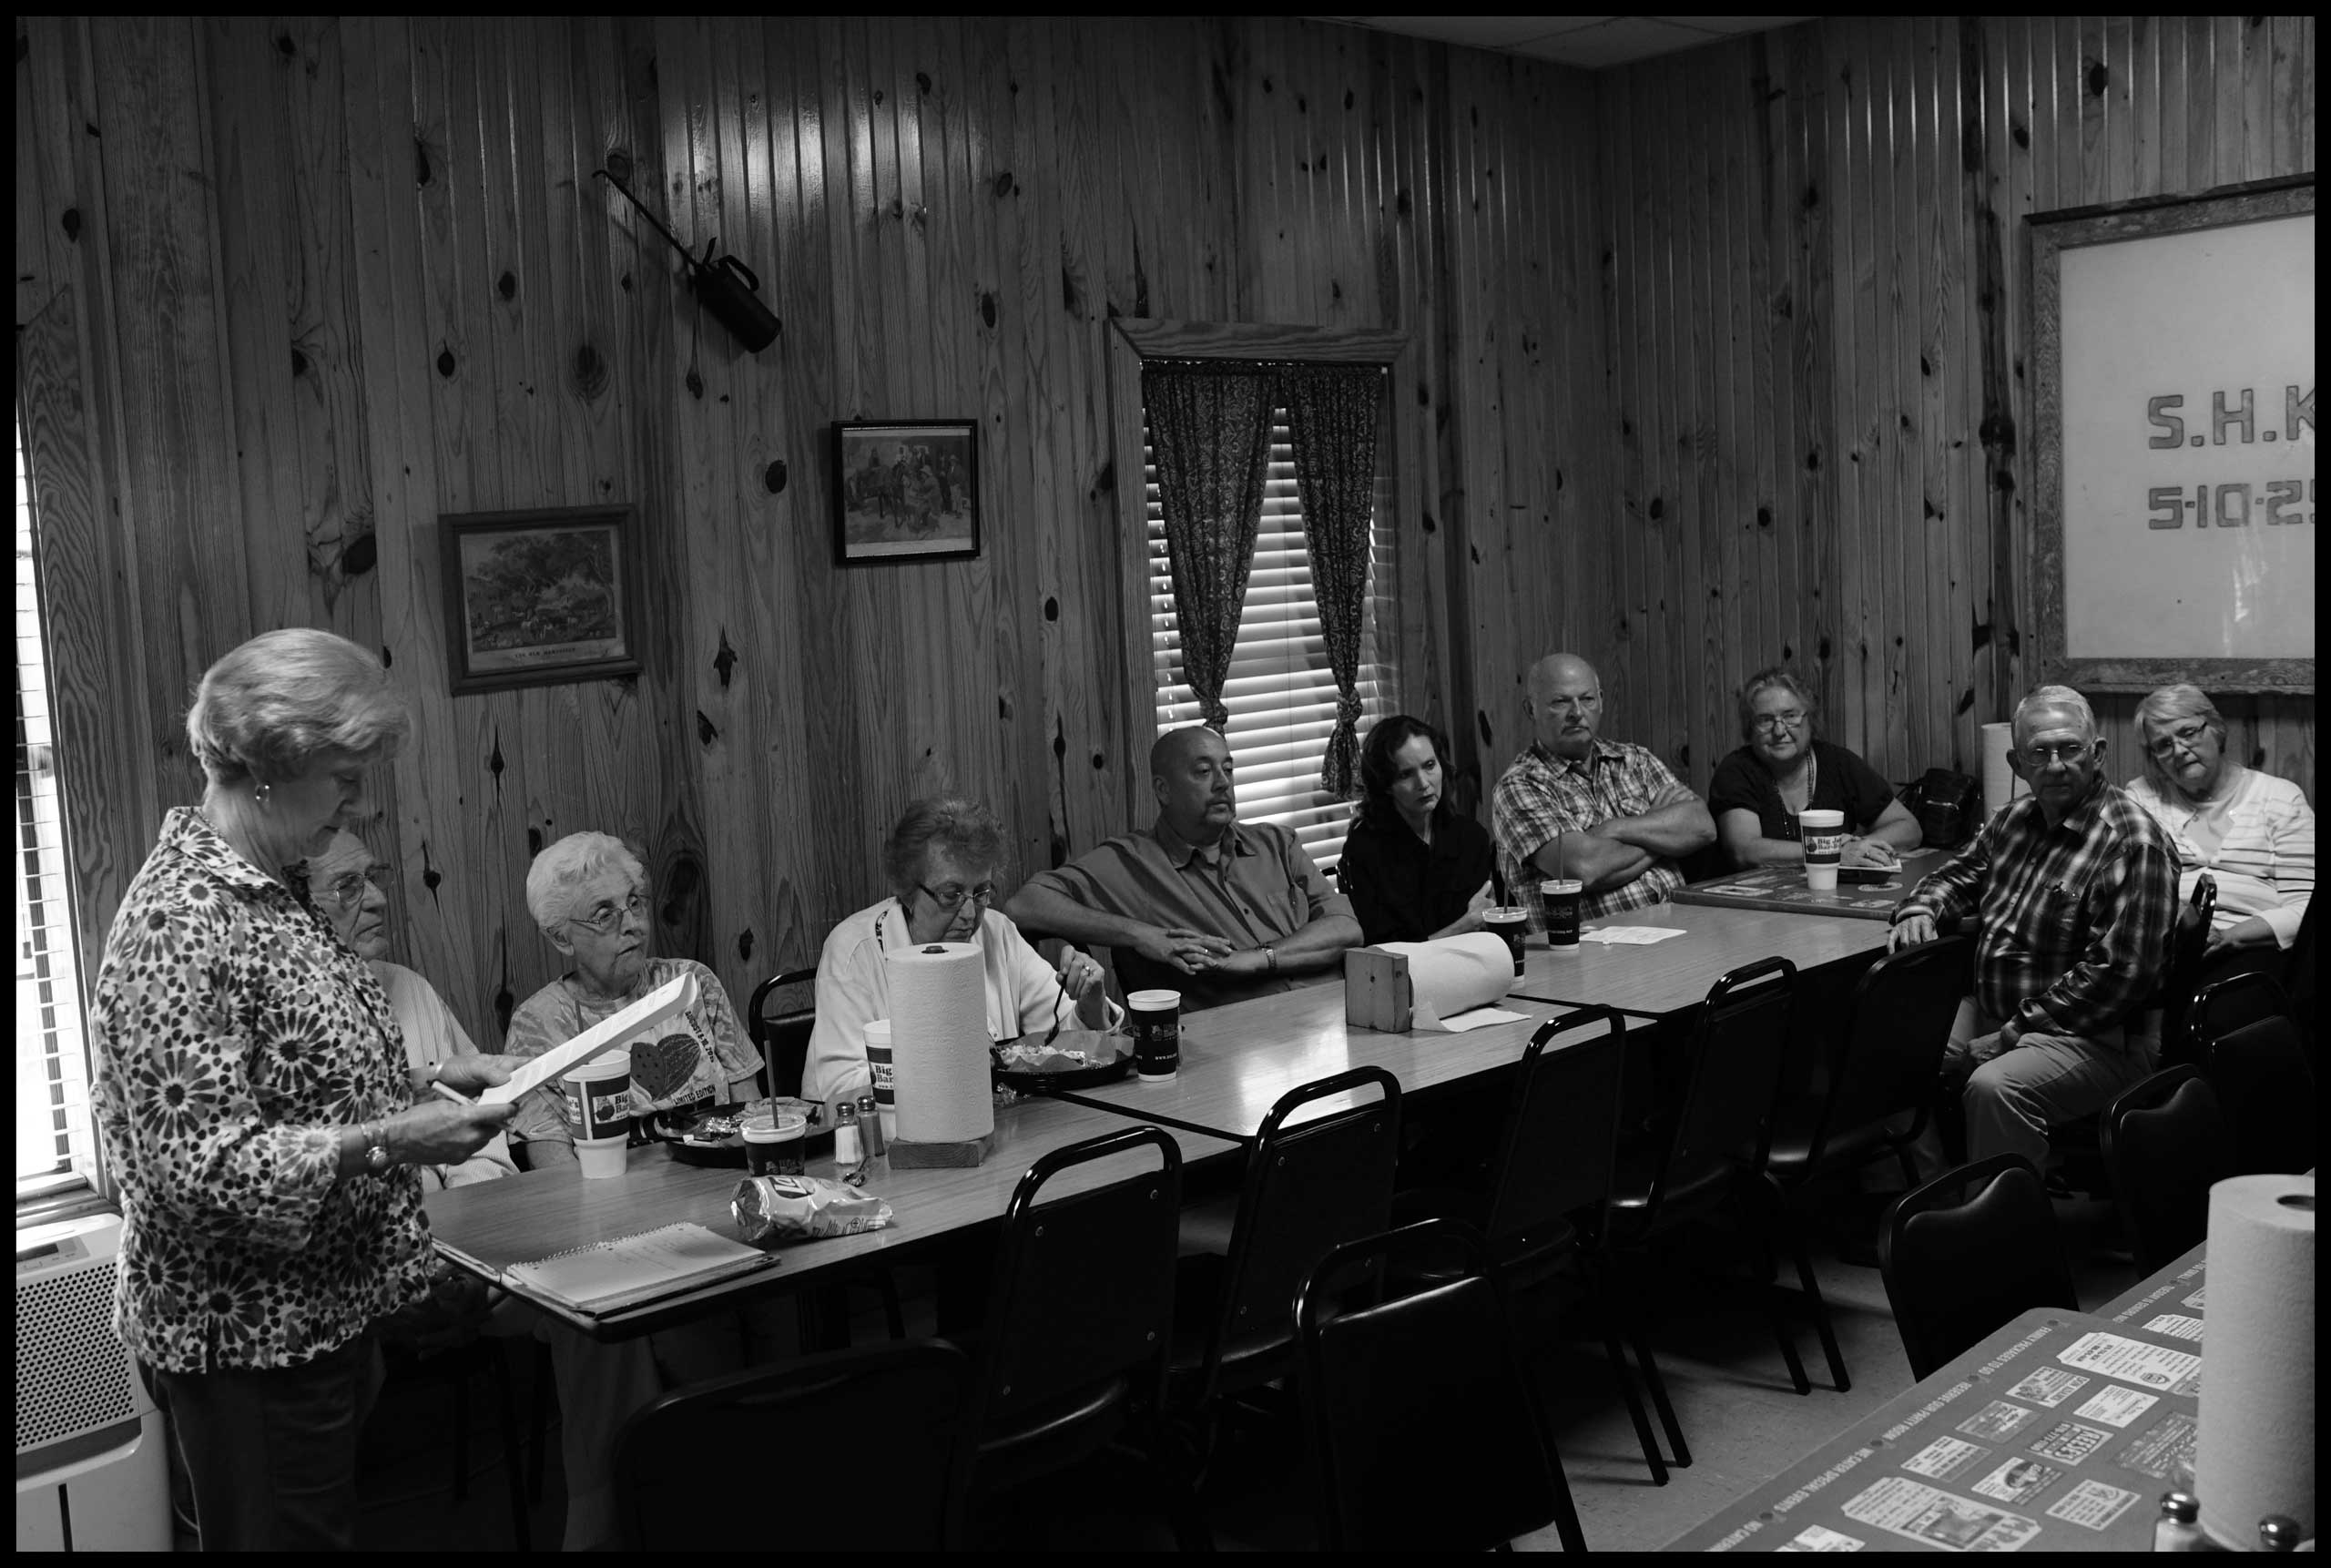 Sara Darling, Chairman of the Hempstead County Republican Committee meets with her fellow Republicans at Big Jake’s Barbeque restaurant and leads the monthly meeting. Hope, Ark. 2016.